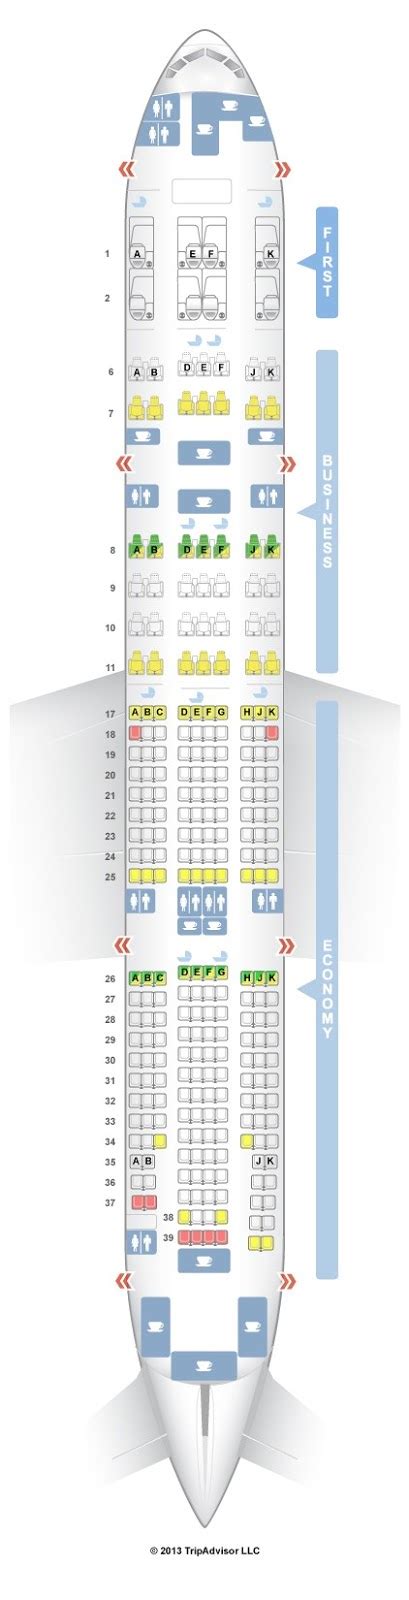 Best Of Boeing 777 200 Seat Map